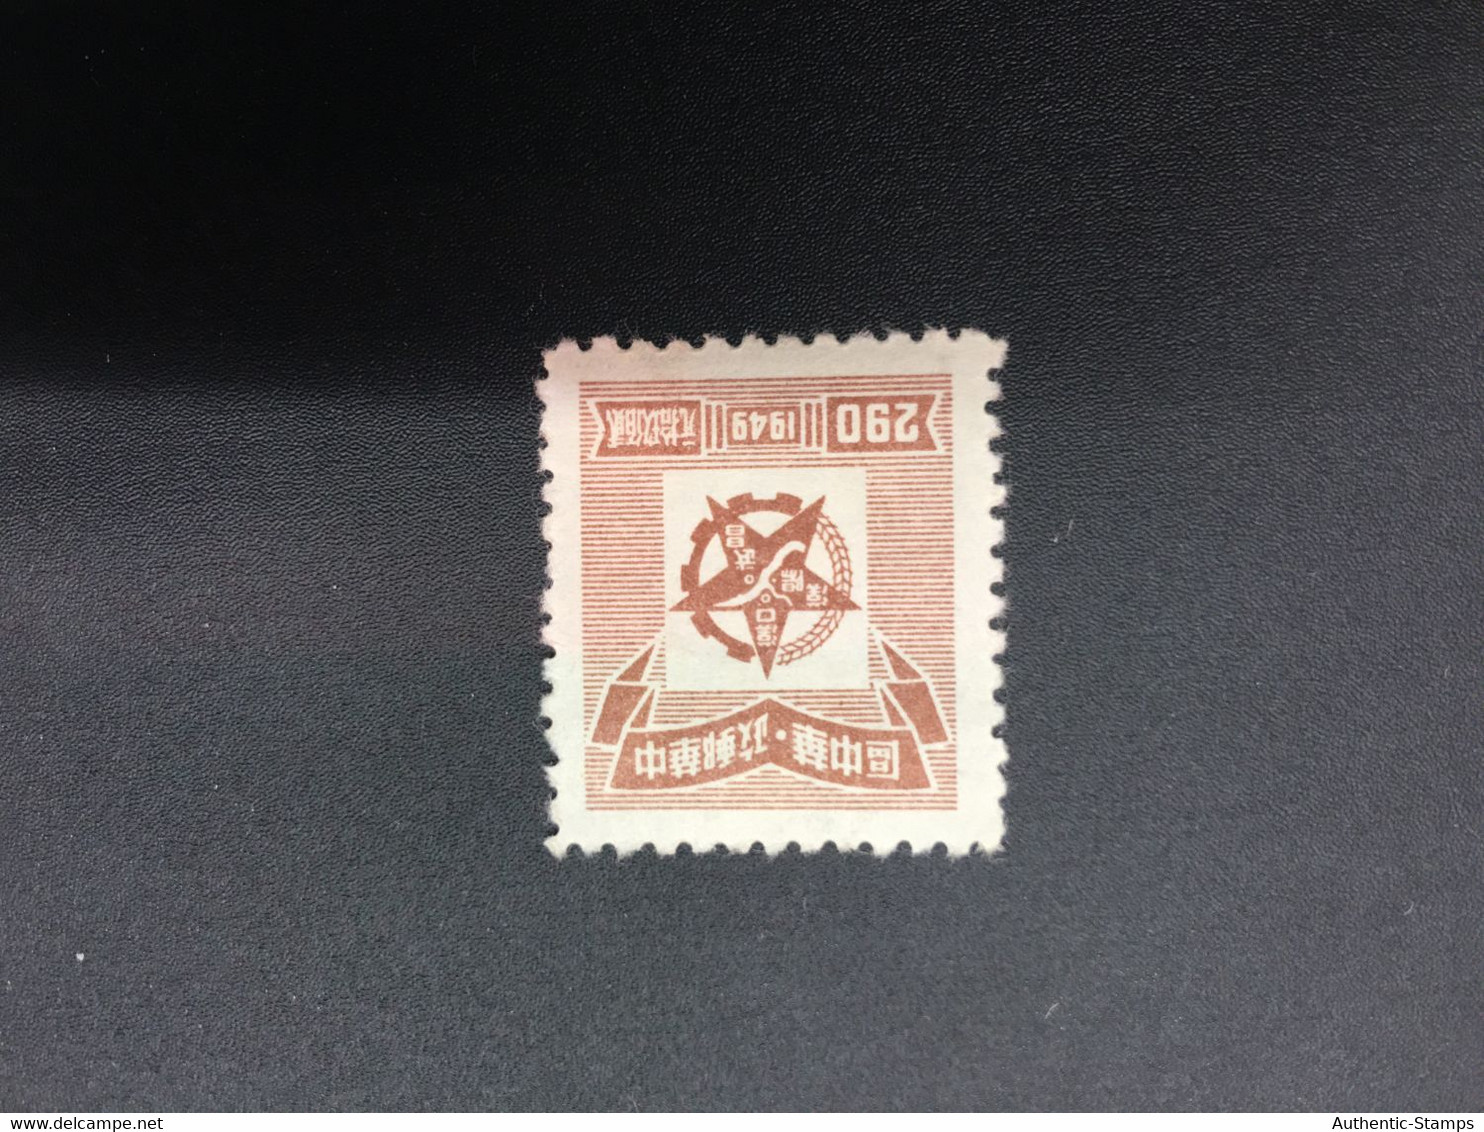 CHINA STAMP,  Unused, TIMBRO, STEMPEL,  CINA, CHINE, LIST 7818 - China Central 1948-49